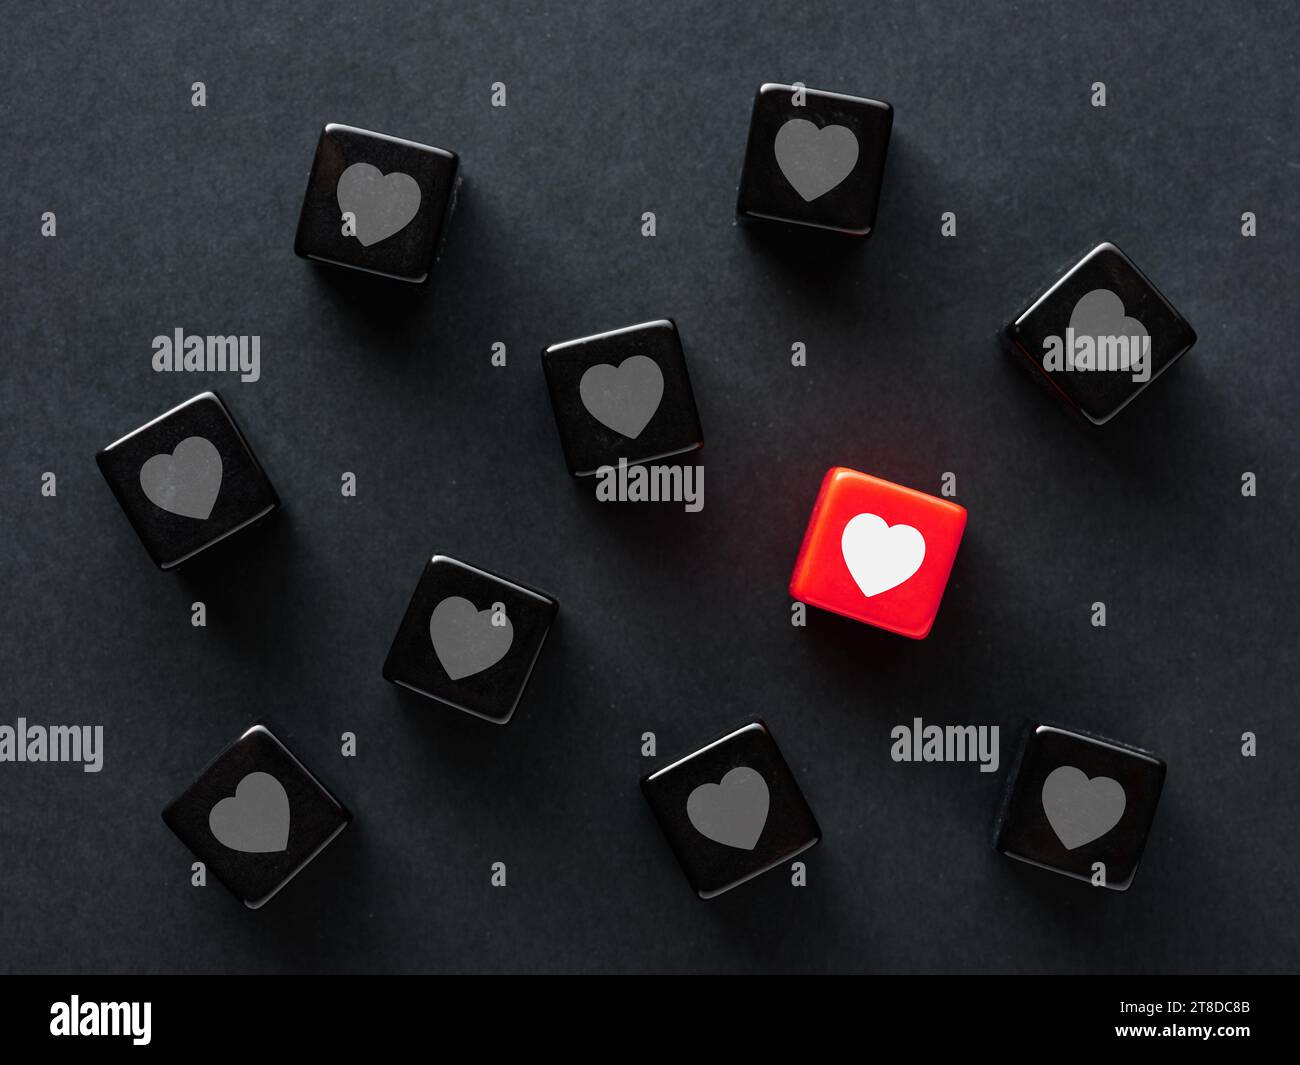 Finding a match in social media. To find love. Online love or matching in dating apps. Heart symbols on black cubes Stock Photo